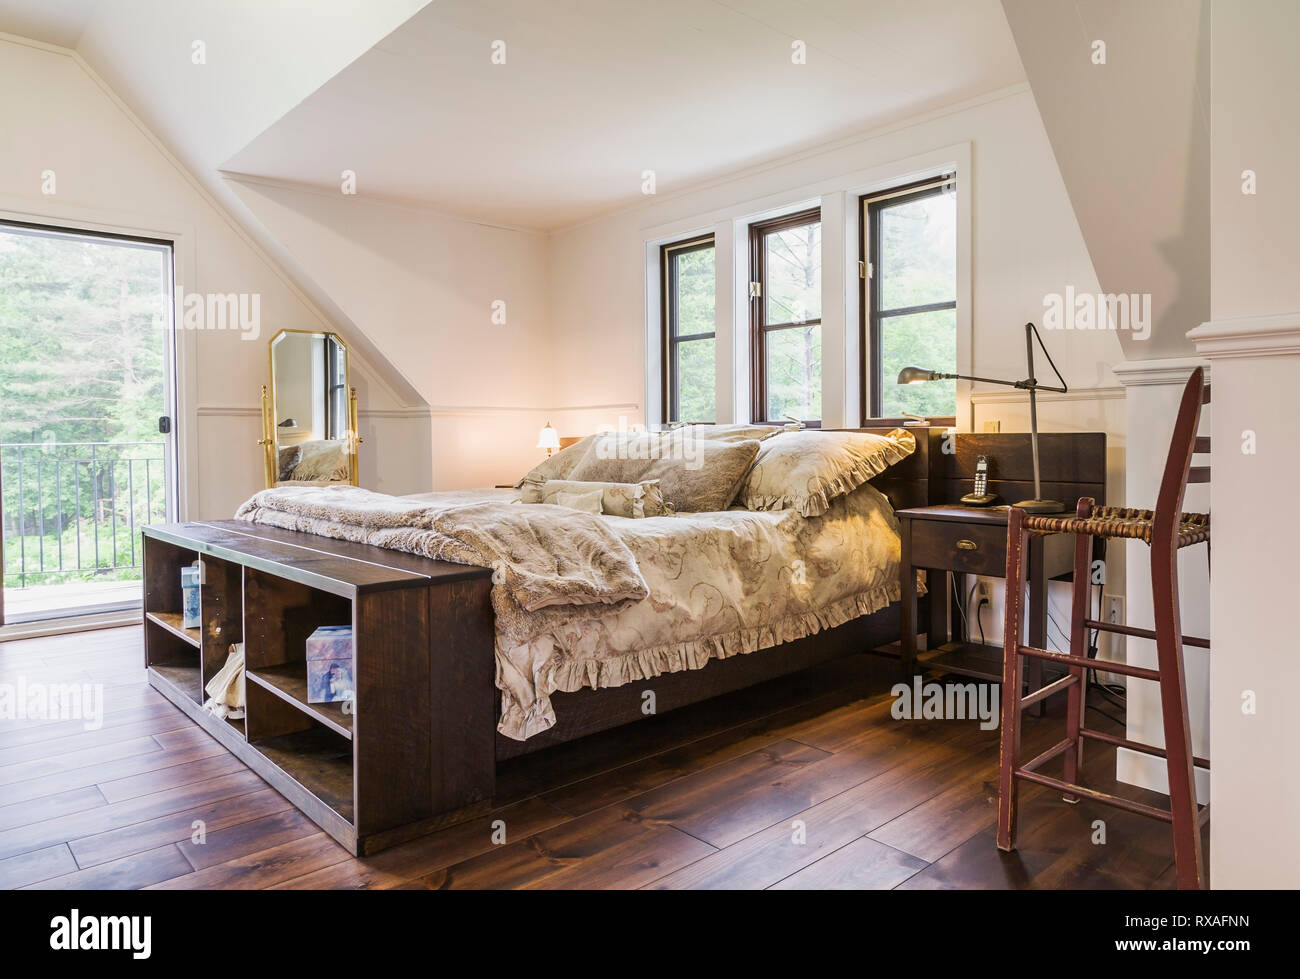 Wood-frame king size bed with flowery bedspread, brass mirror and antique wooden high chair in master bedroom on upper floor inside a New Hampton style home, Quebec, Canada. This image is property released. CUPR0208 Stock Photo